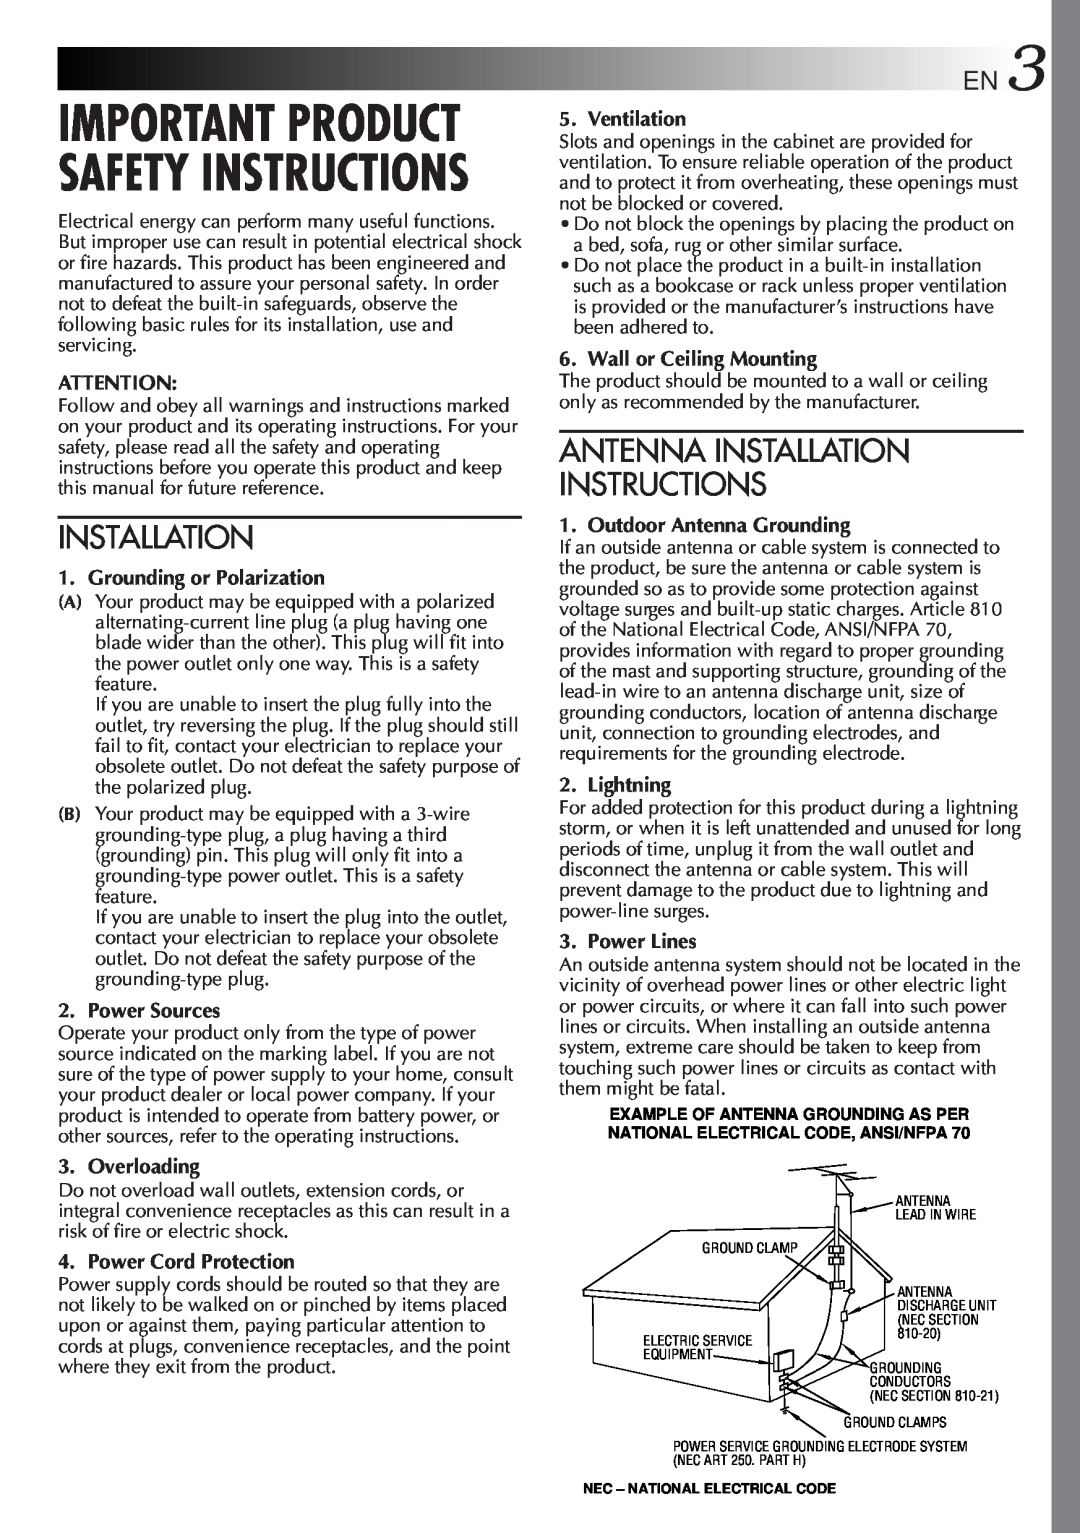 JVC GR-DVL9000 Antenna Installation Instructions, Important Product Safety Instructions, Grounding or Polarization 